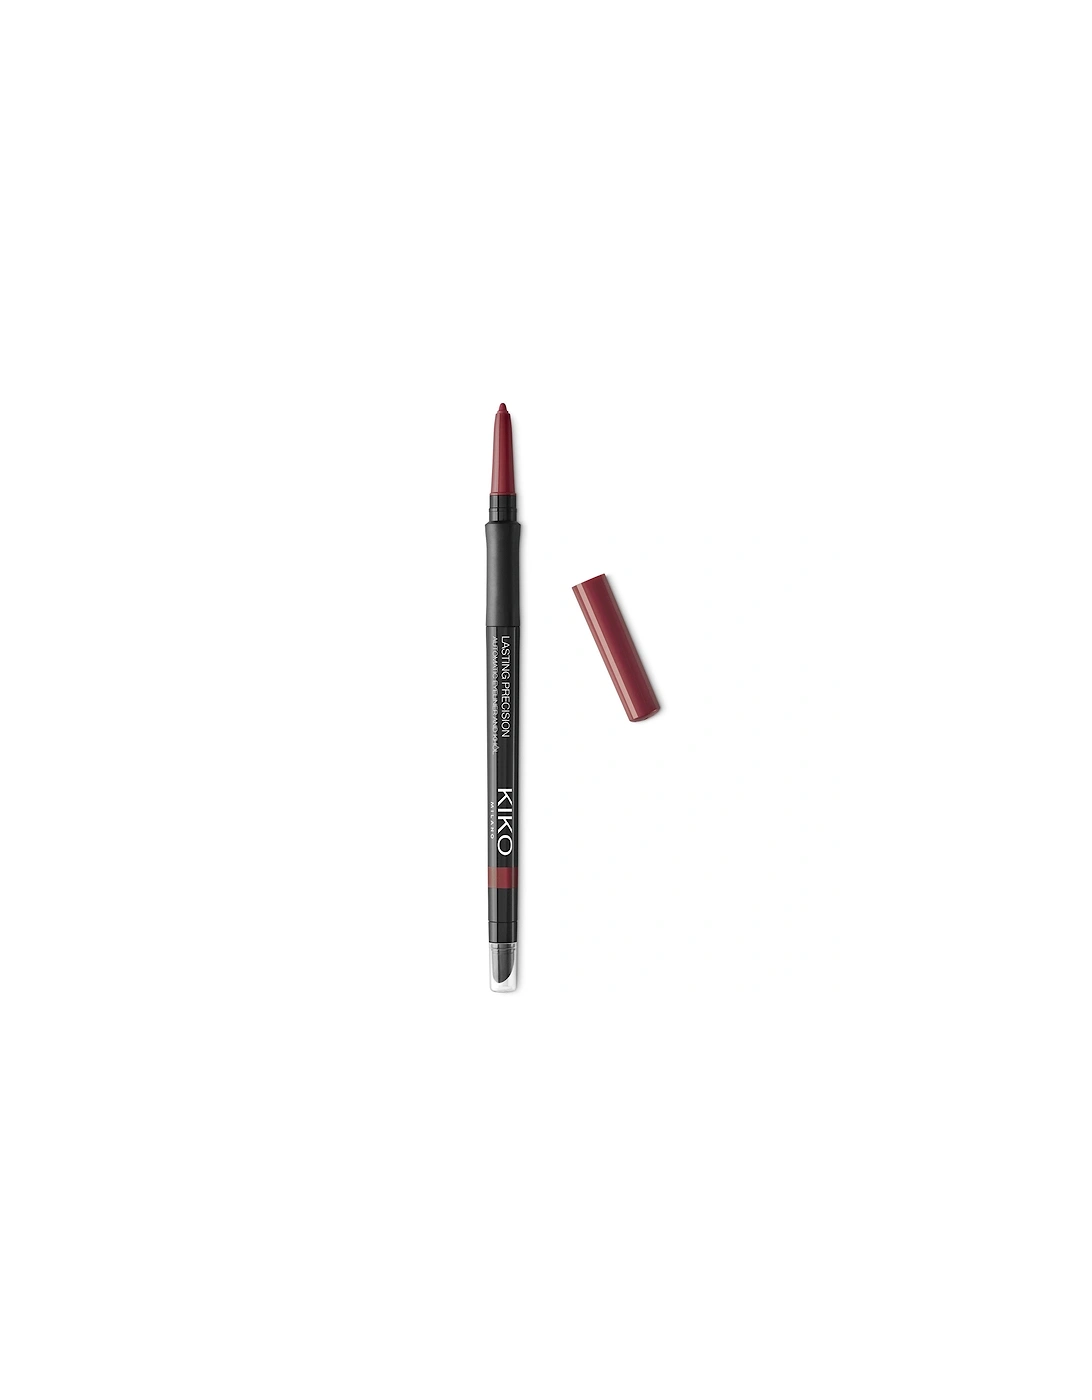 Lasting Precision Automatic Eyeliner And Khôl - 04 Spicy Burgundy, 2 of 1